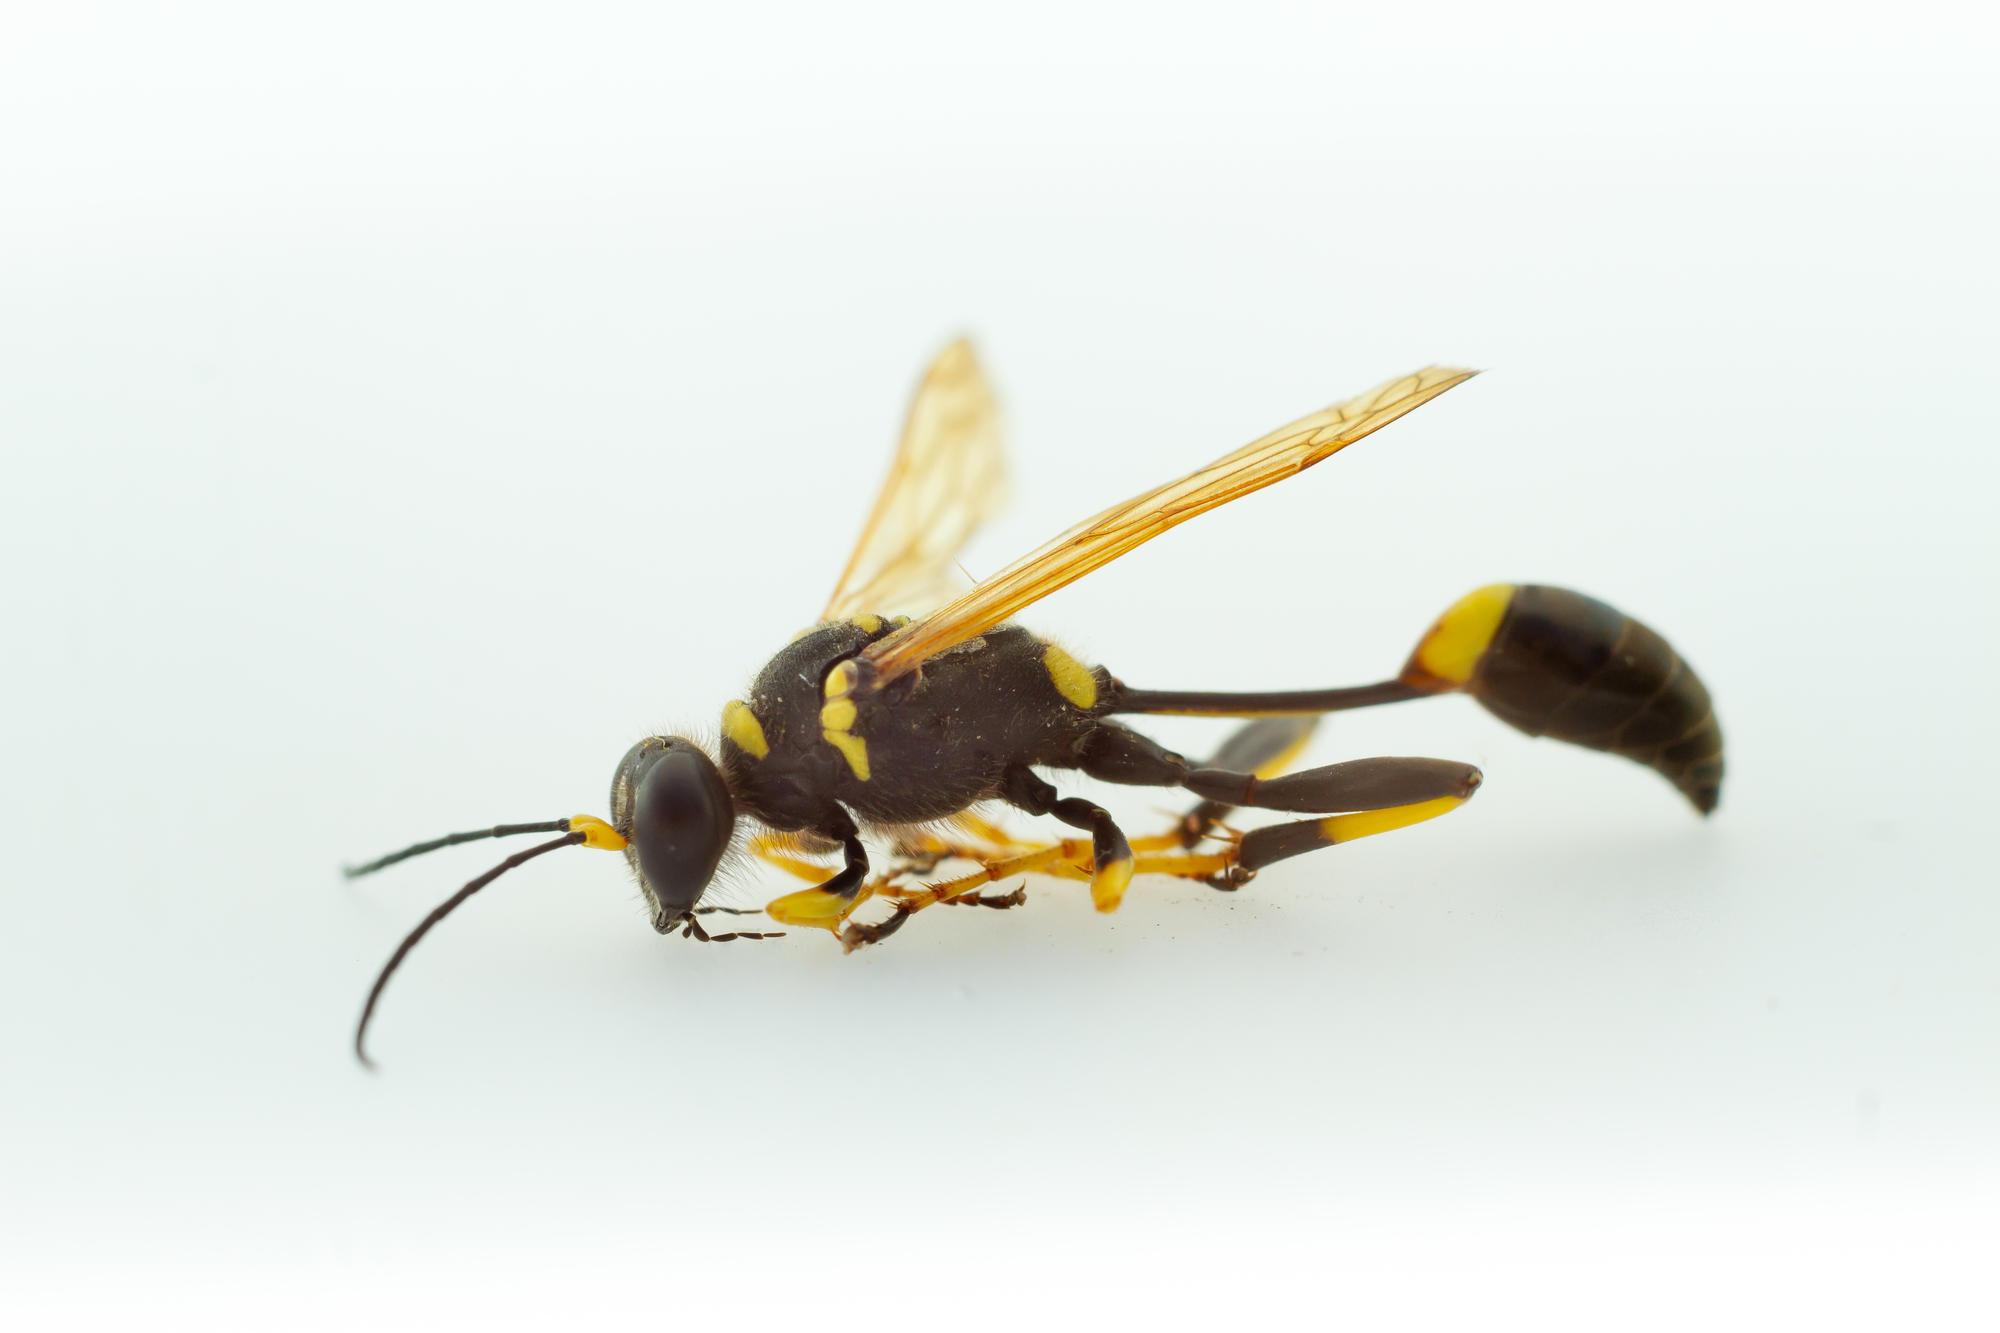 black wasp with long thin waist, yellow wings and legs